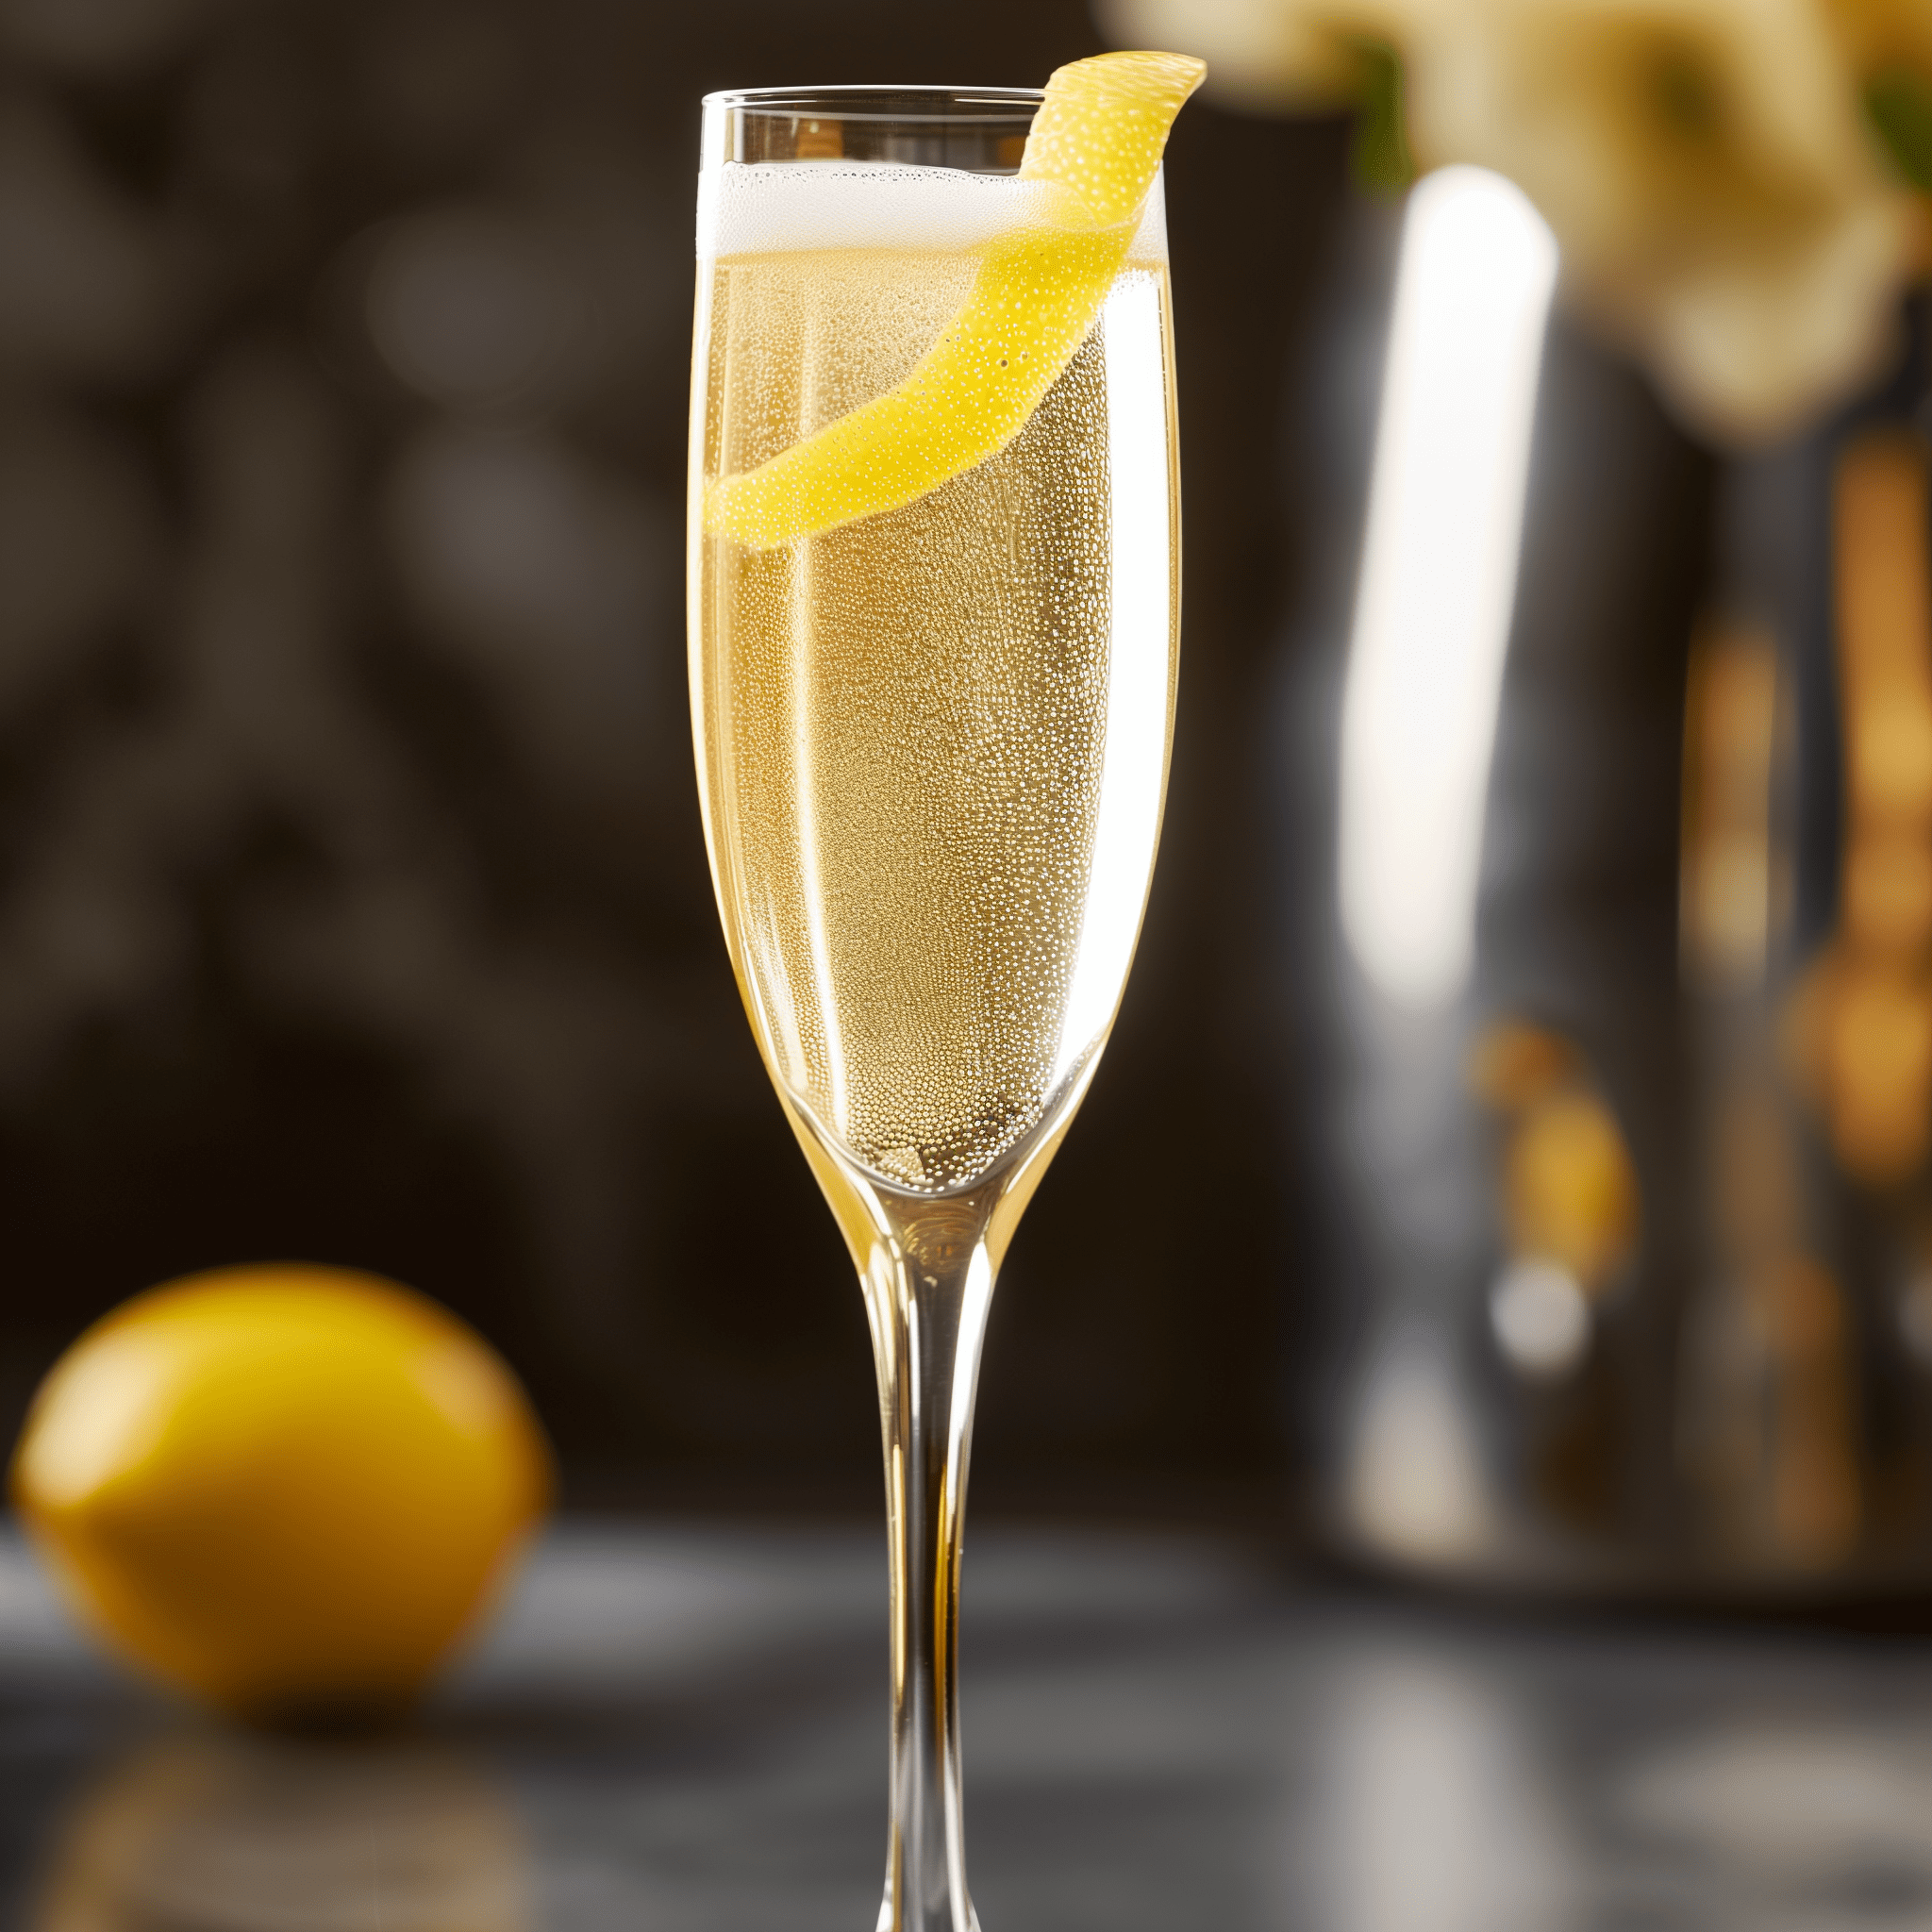 French 75 Mocktail Recipe - The French 75 Mocktail has a crisp and effervescent taste, with a delightful balance of tart and sweet. The citrus notes from the lemon provide a refreshing zing, while the non-alcoholic sparkling wine adds a sophisticated fizz that tickles the palate.